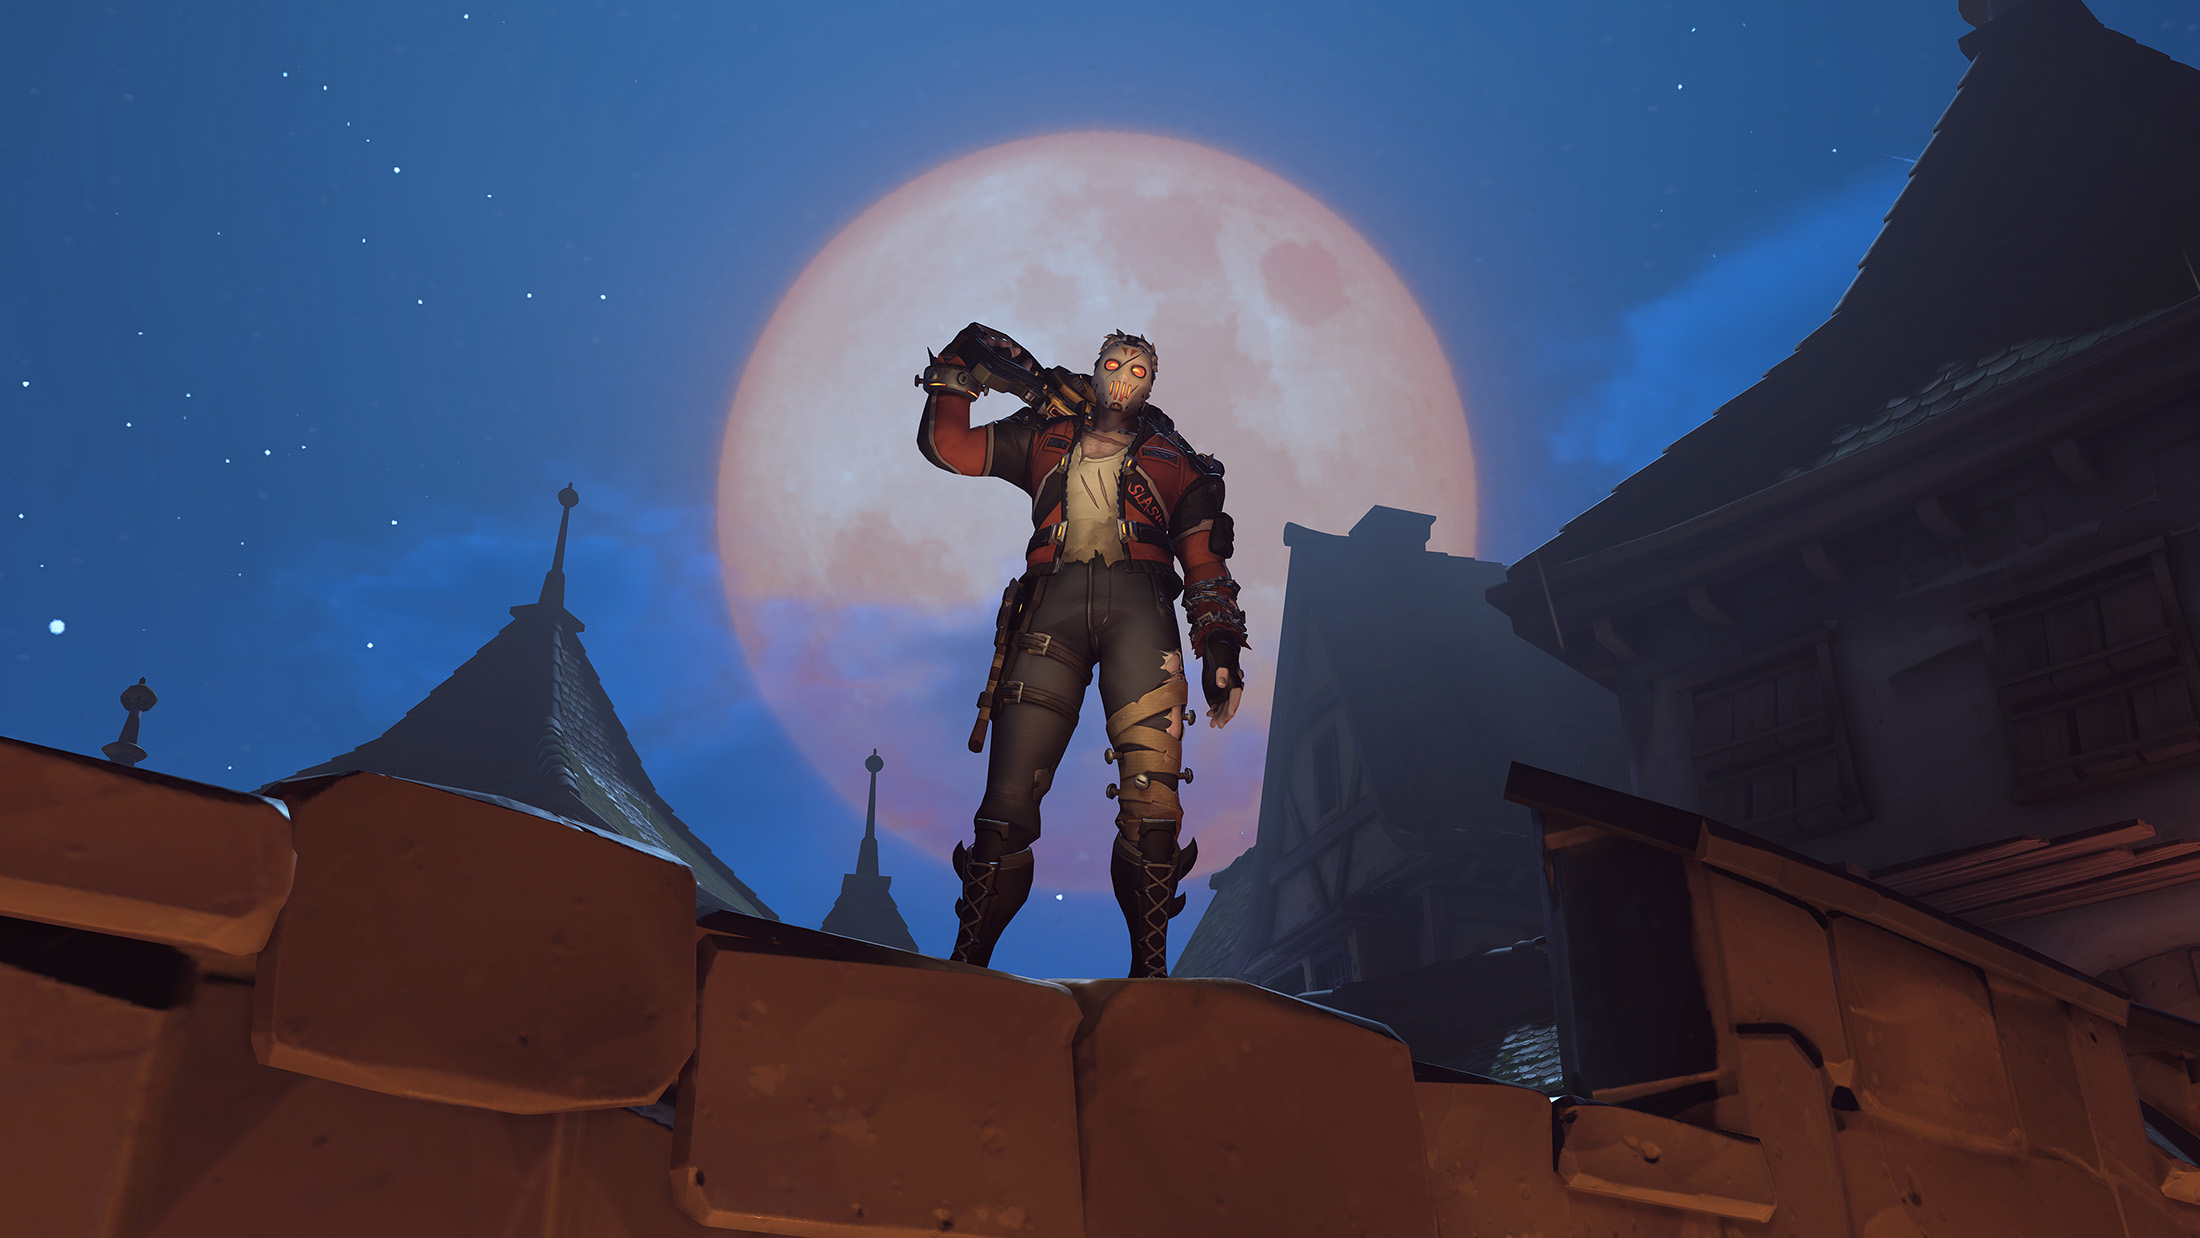 Check out the new skins for Overwatch's Halloween Terror event